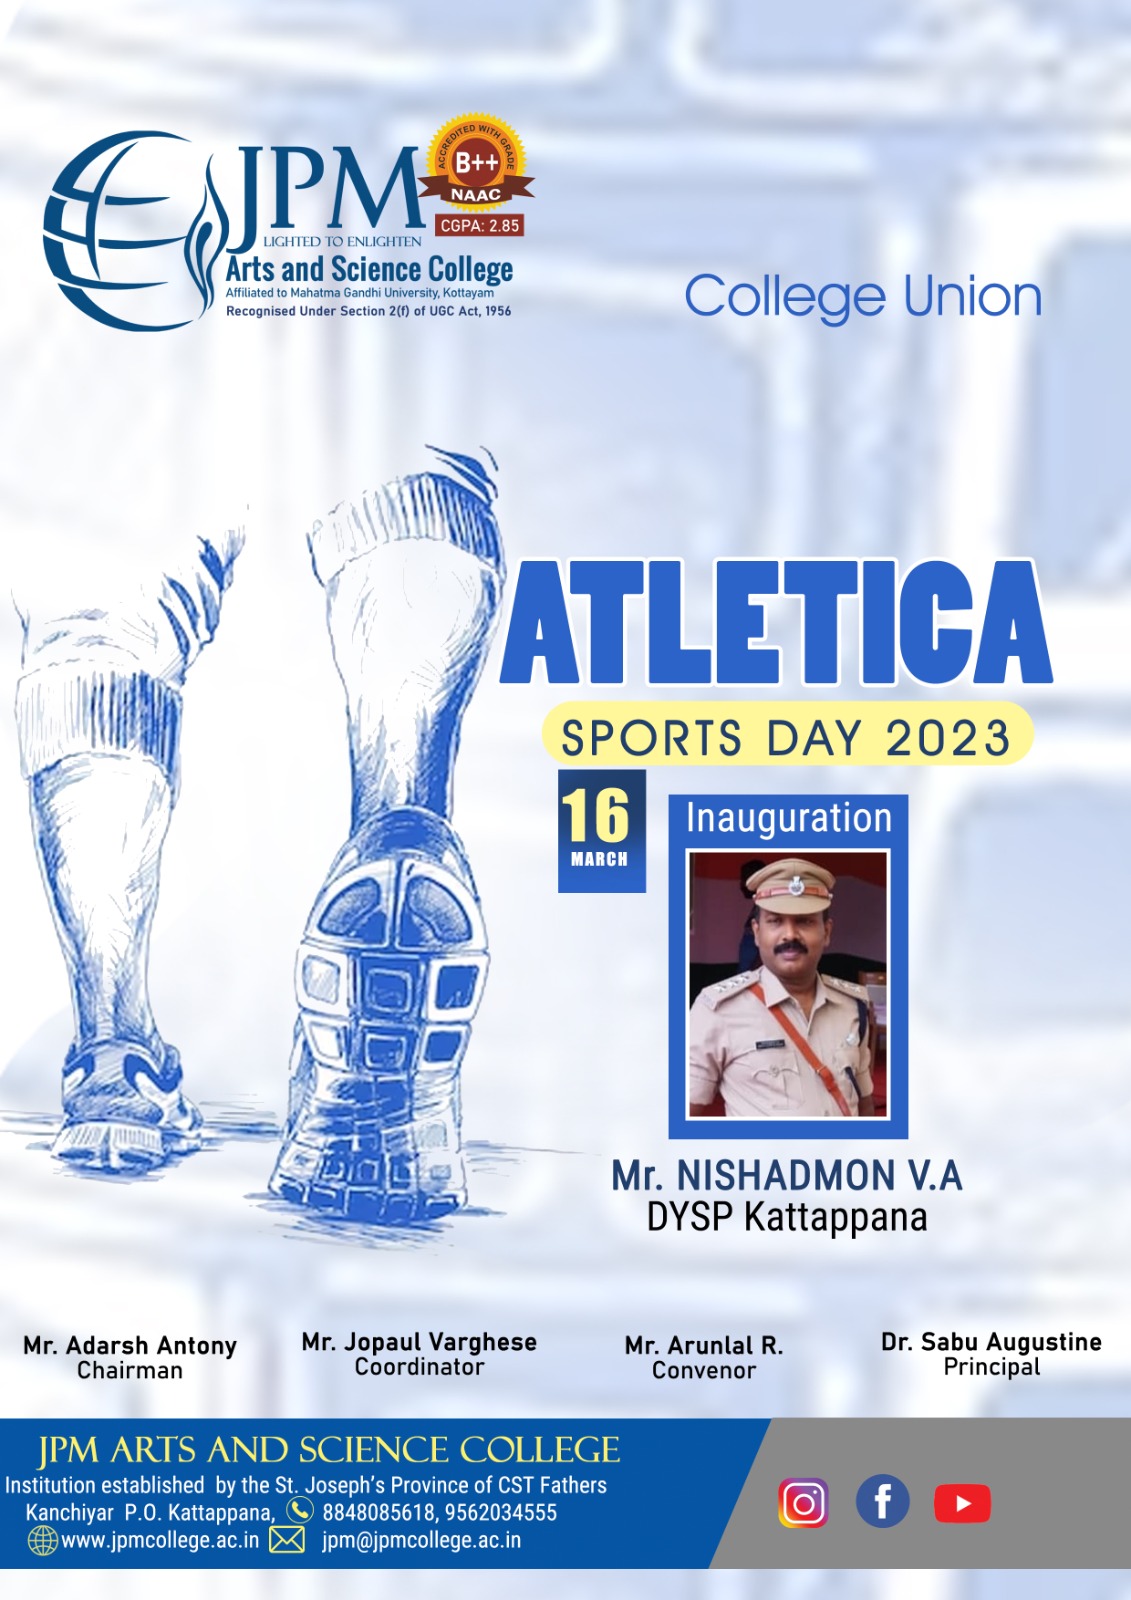 ATLETICA Sports Day 2023